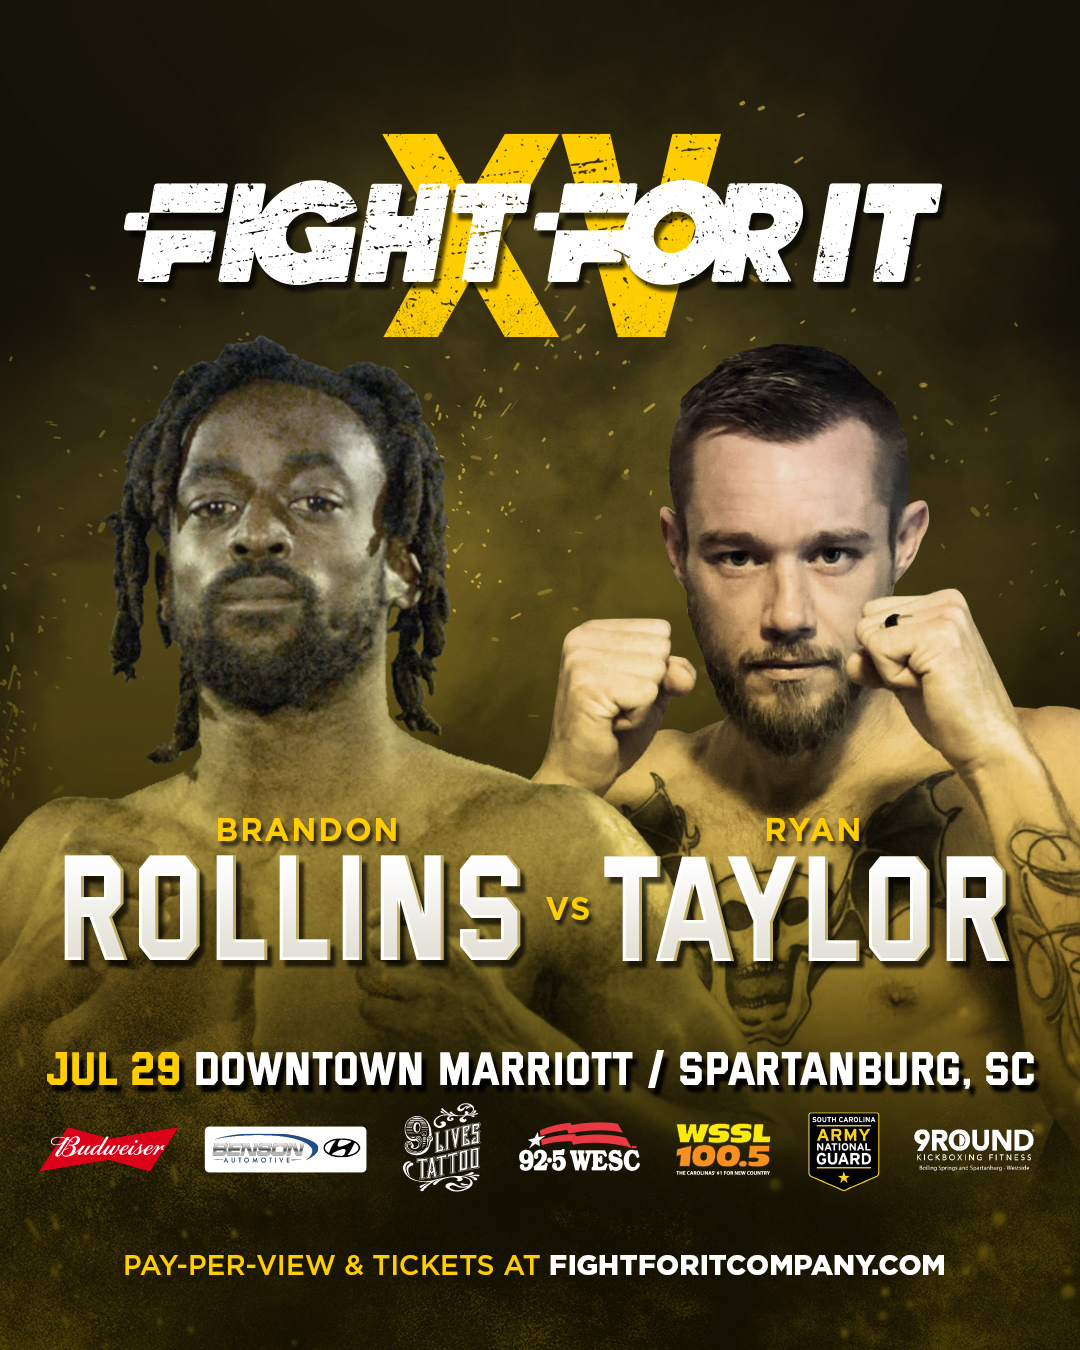 Title Fight Ryan Taylor and Brandon Rollins battle for Kickboxing glory at Fight For It XV